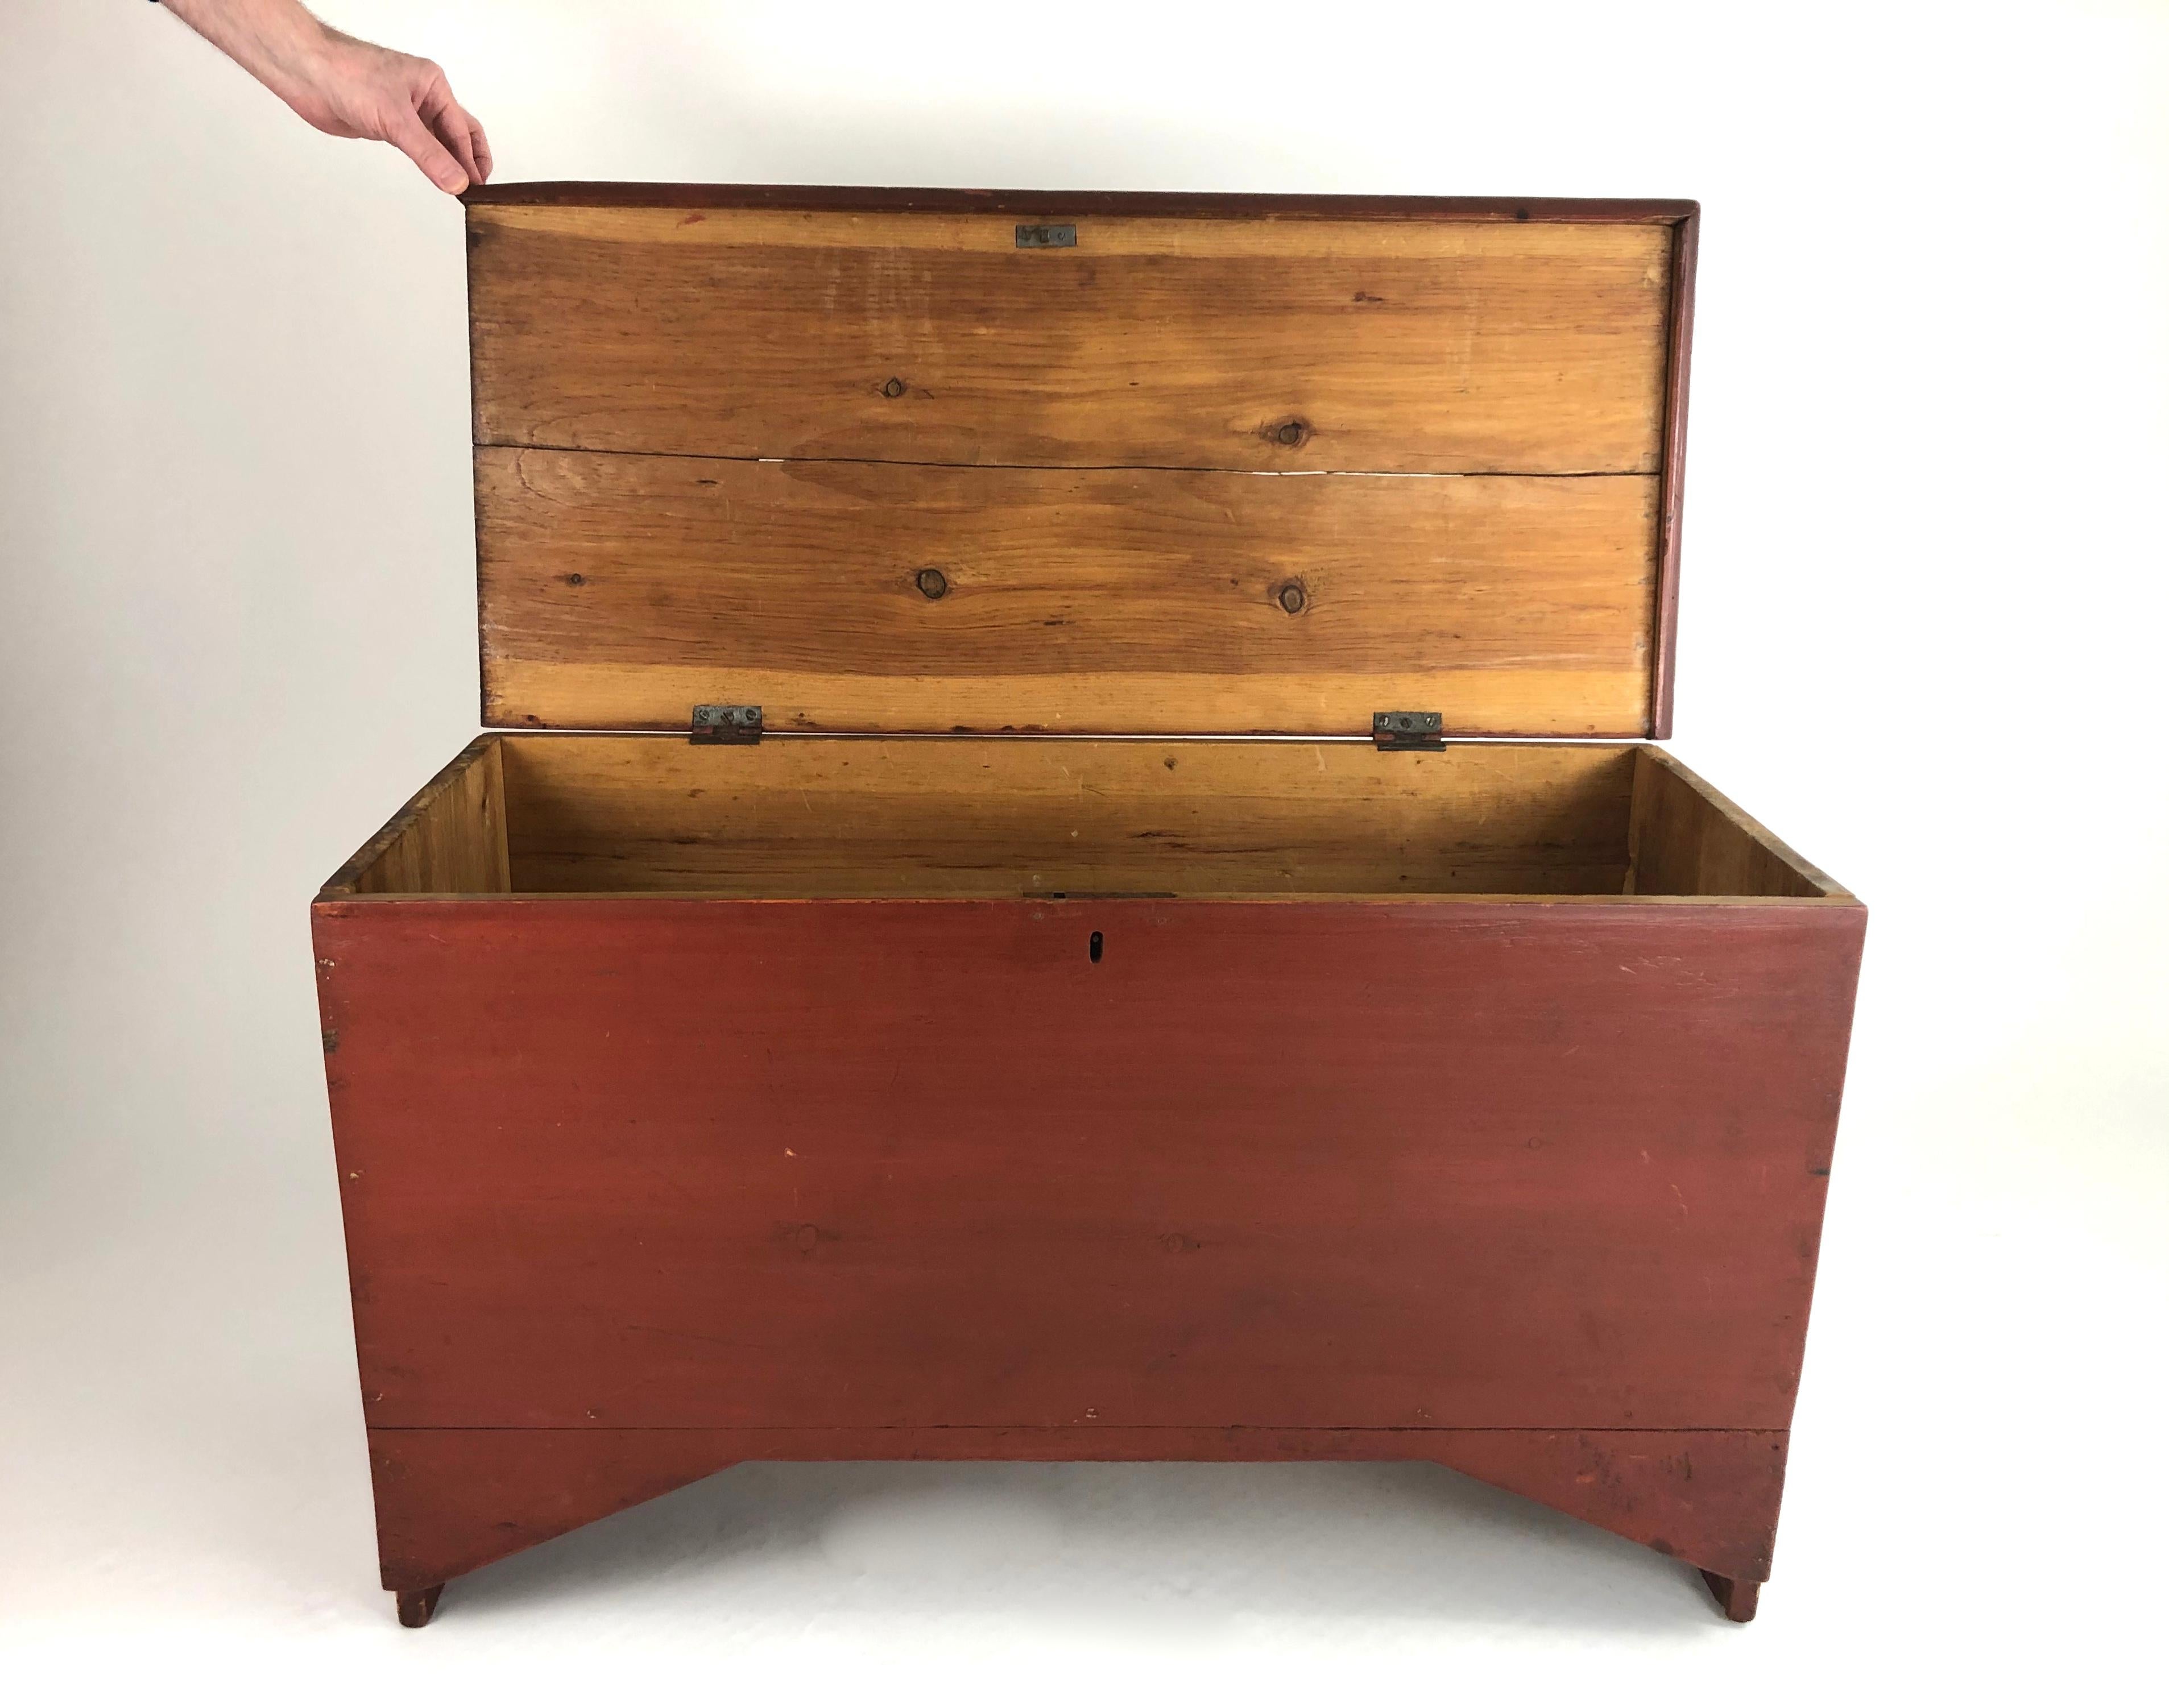 A 19th century American small scale six board red painted blanket chest with bread board top and boot jack ends, with a shaped, angled apron. Solid and versatile small size.



  